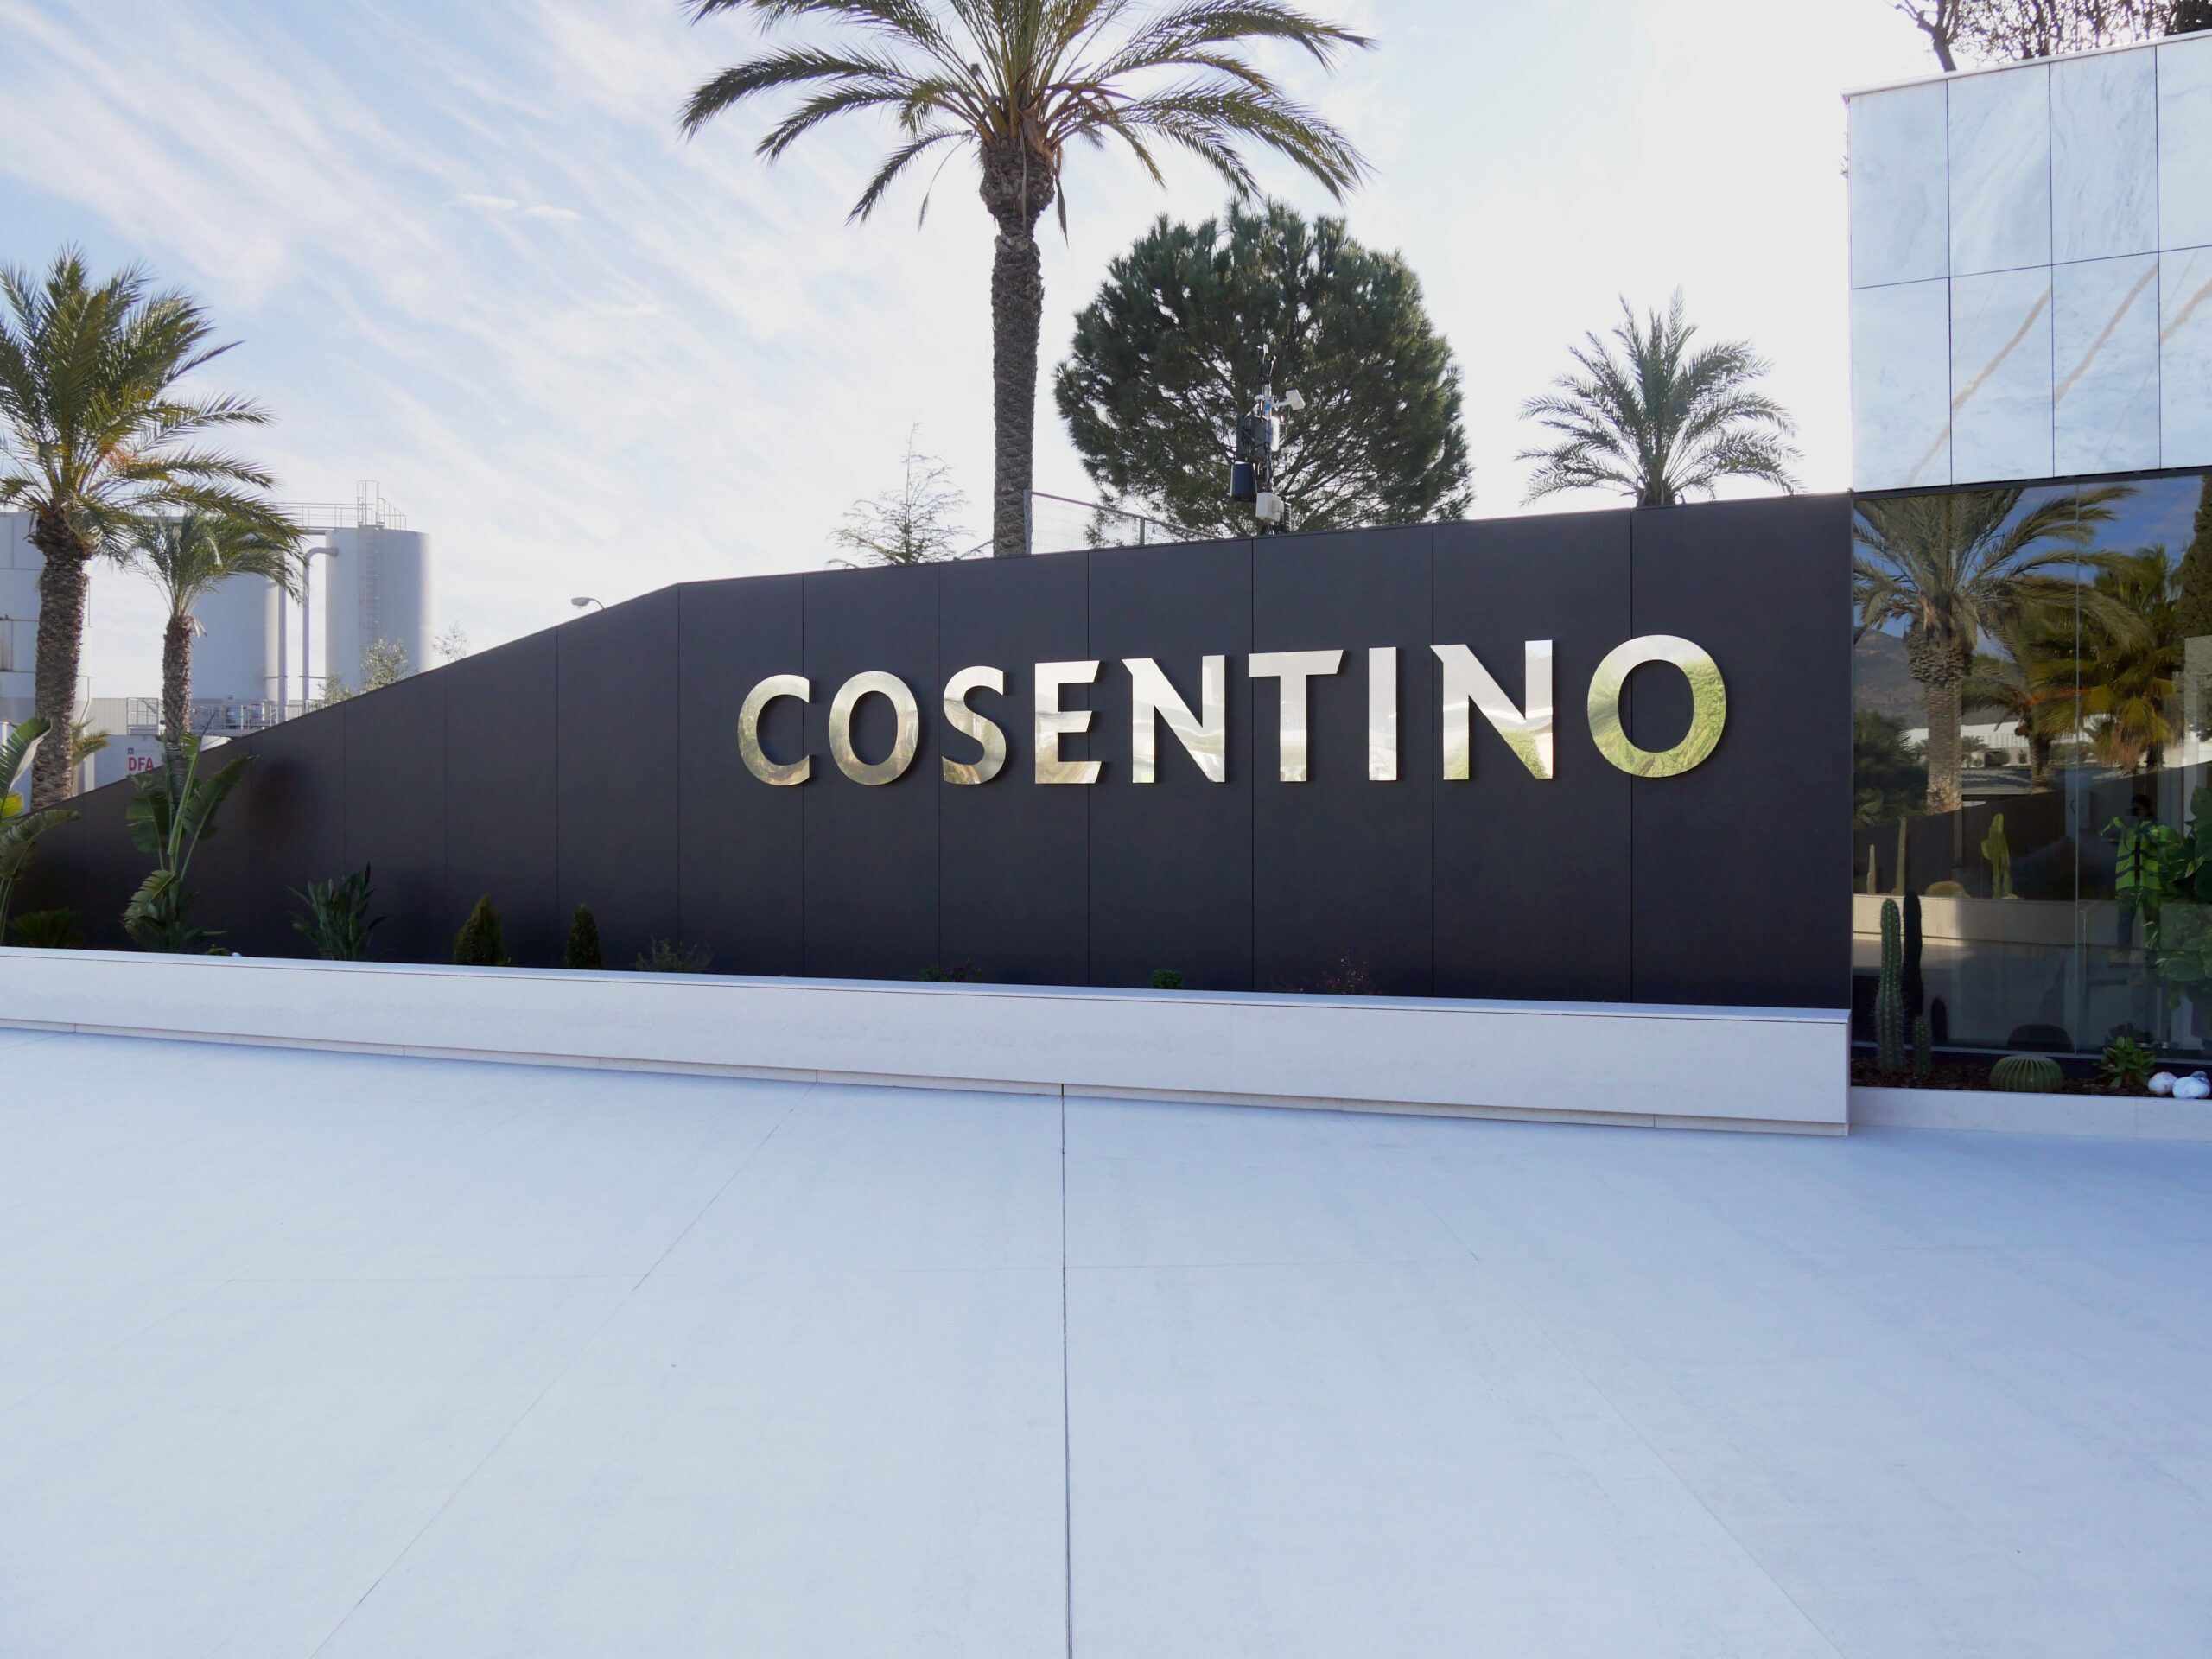 Image 34 of Entrada HQ Cosentino 2 1 3 scaled in The Cosentino Group and GandiaBlasco join forces - Cosentino